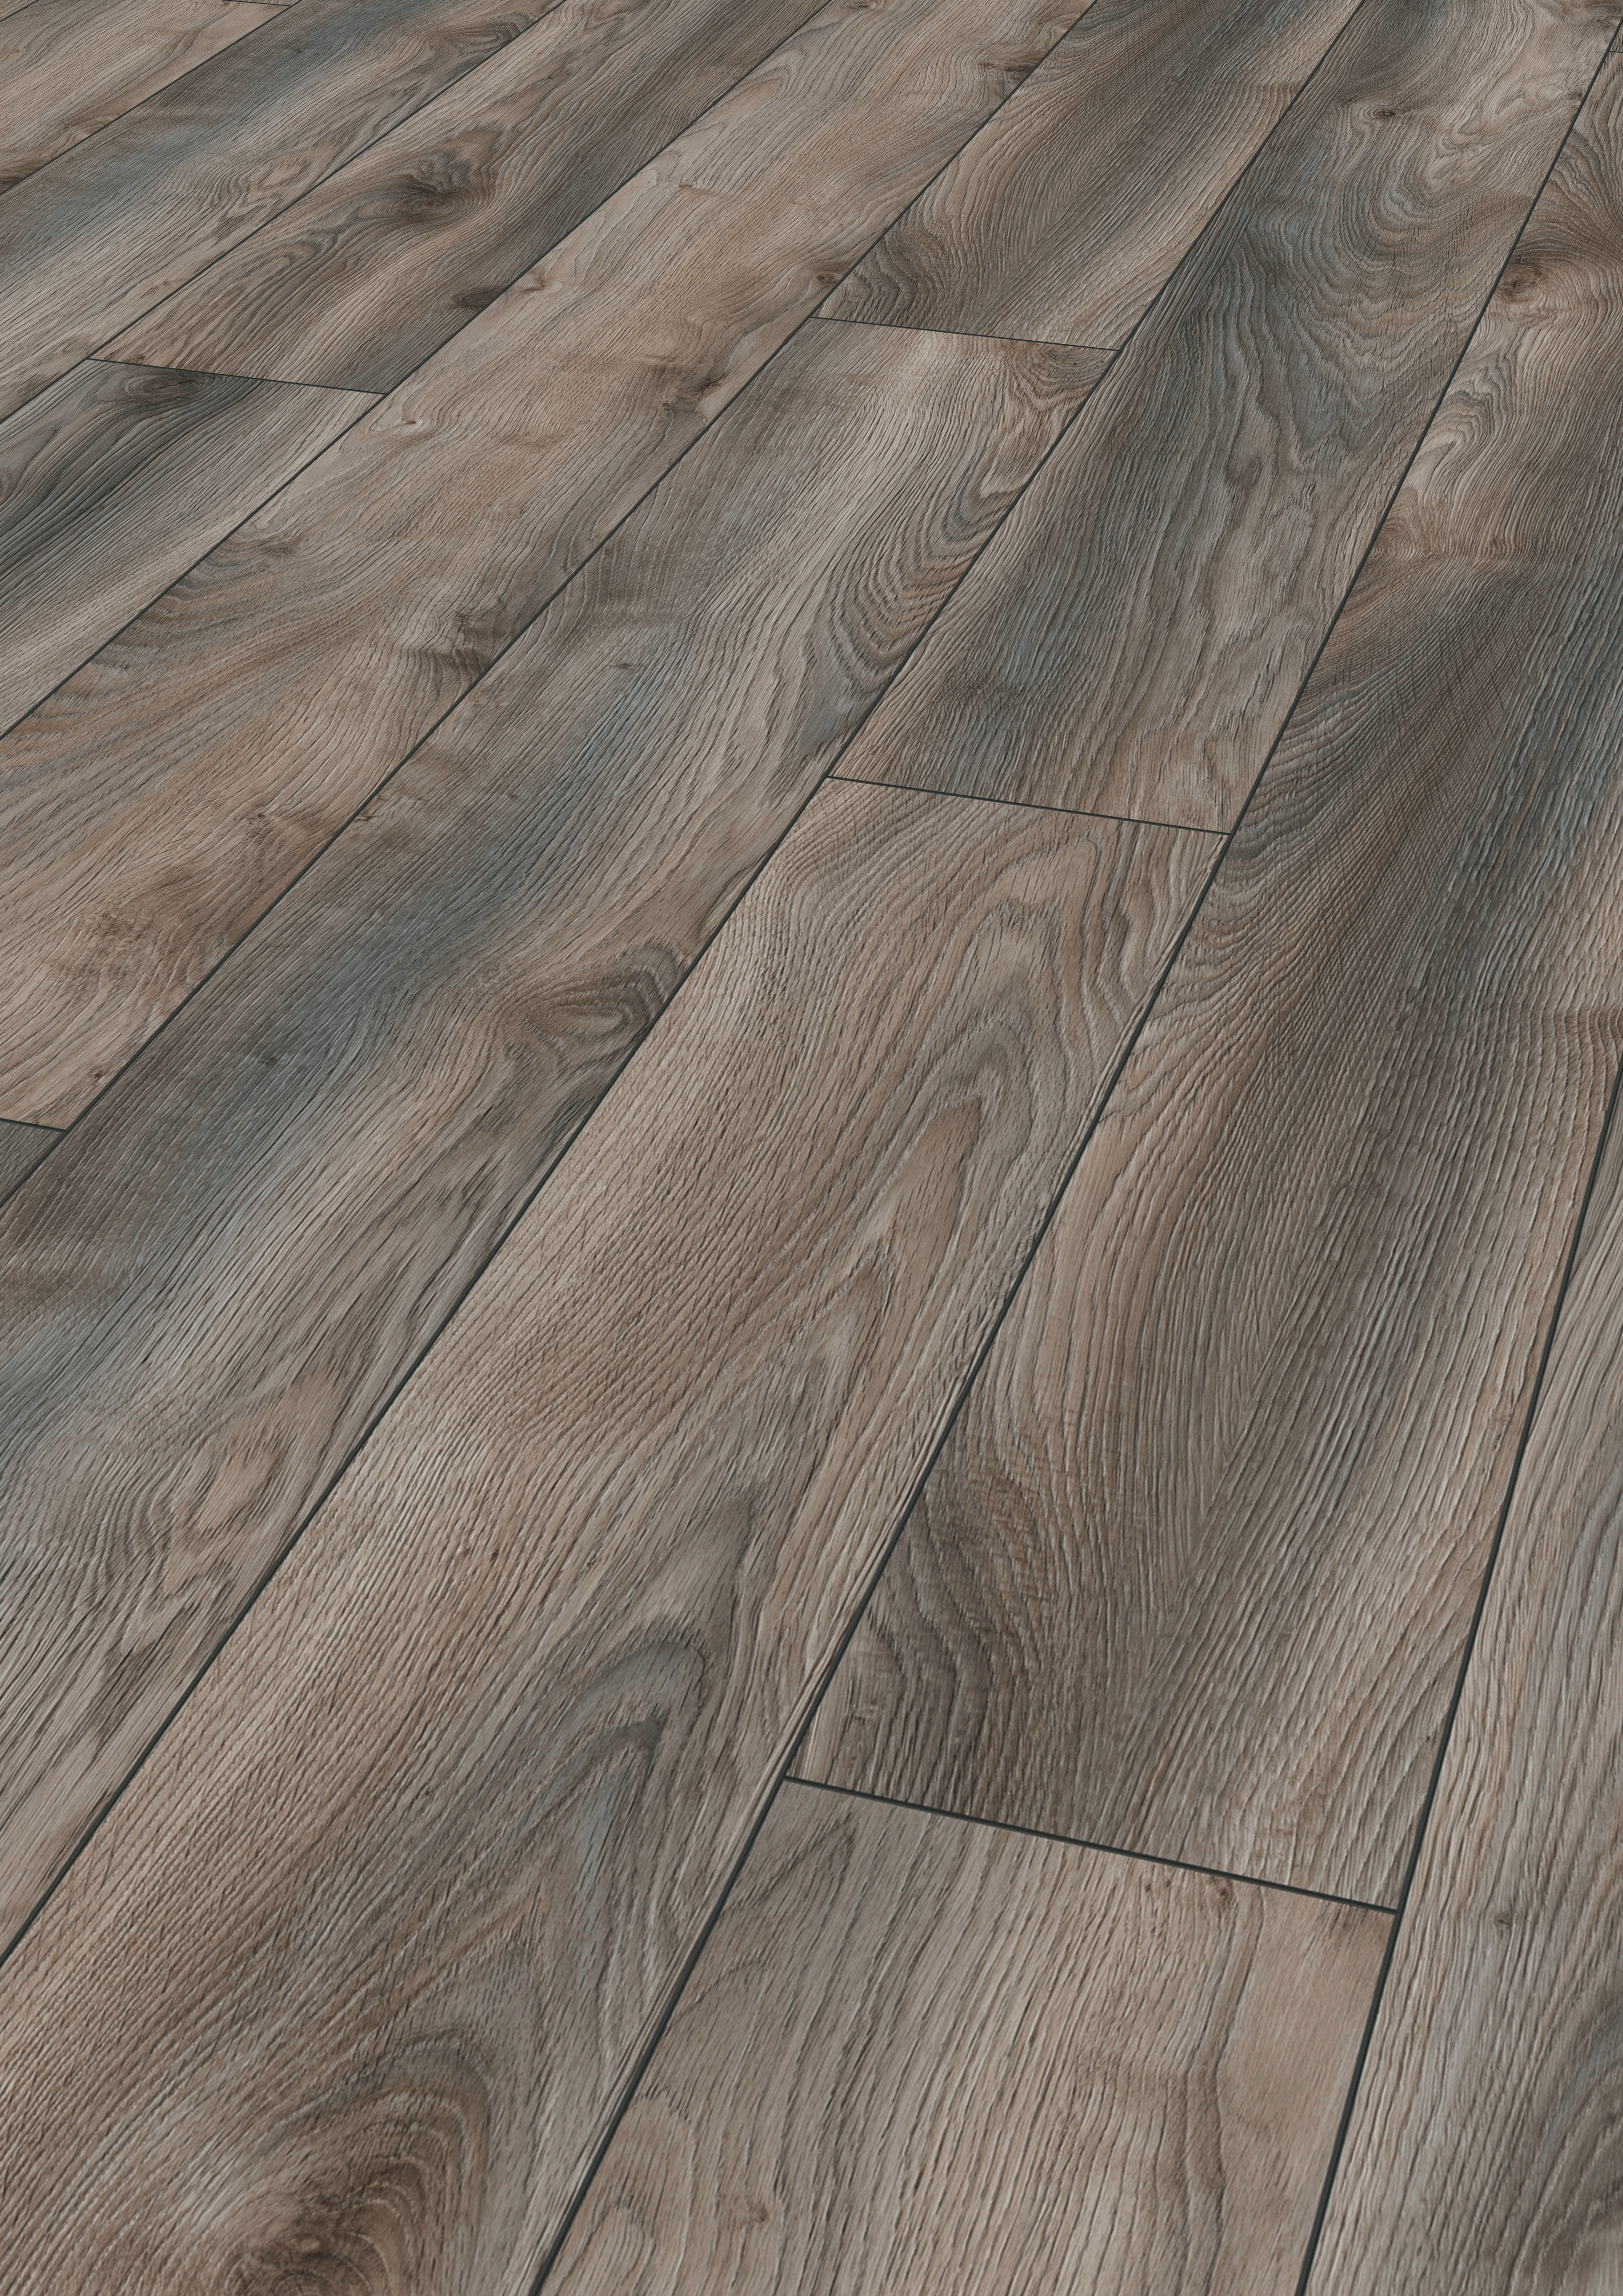 Engineered Hardwood Flooring Ottawa Of Mammut Laminate Flooring In Country House Plank Style Kronotex within Download Picture Amp